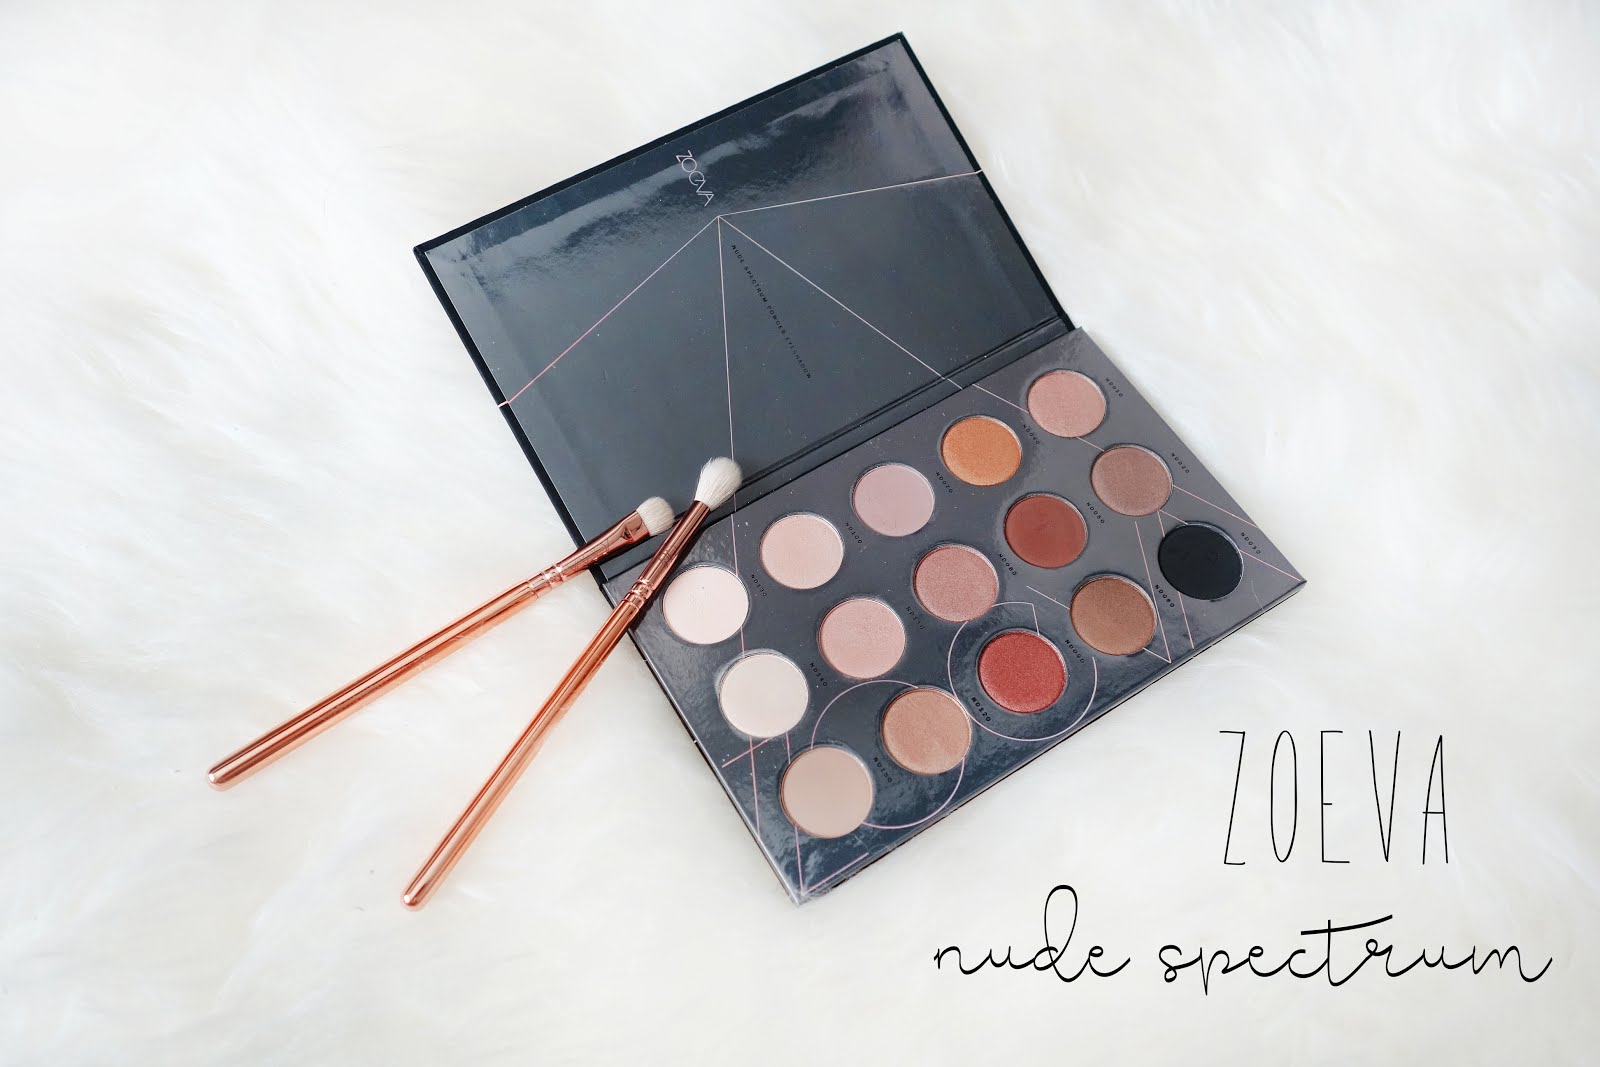 Zoeva Nude Spectrum Eyeshadow Palette Review and Swatches.